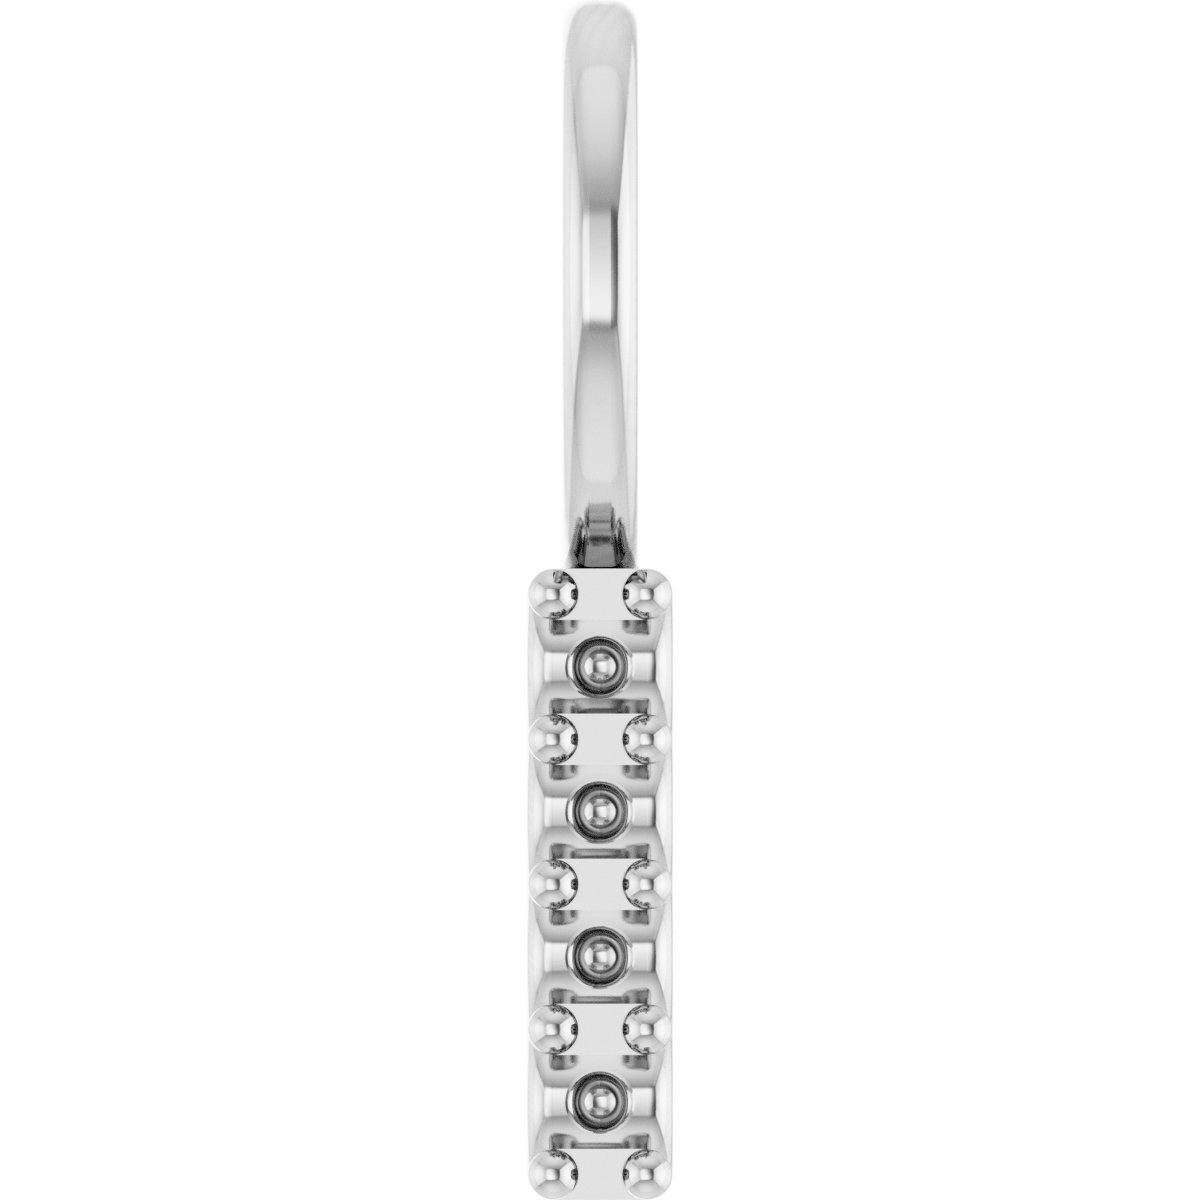 Continuum Sterling Silver 1.7 mm Round 15.7 mm Vertical Bar Charm/Pendant Mounting